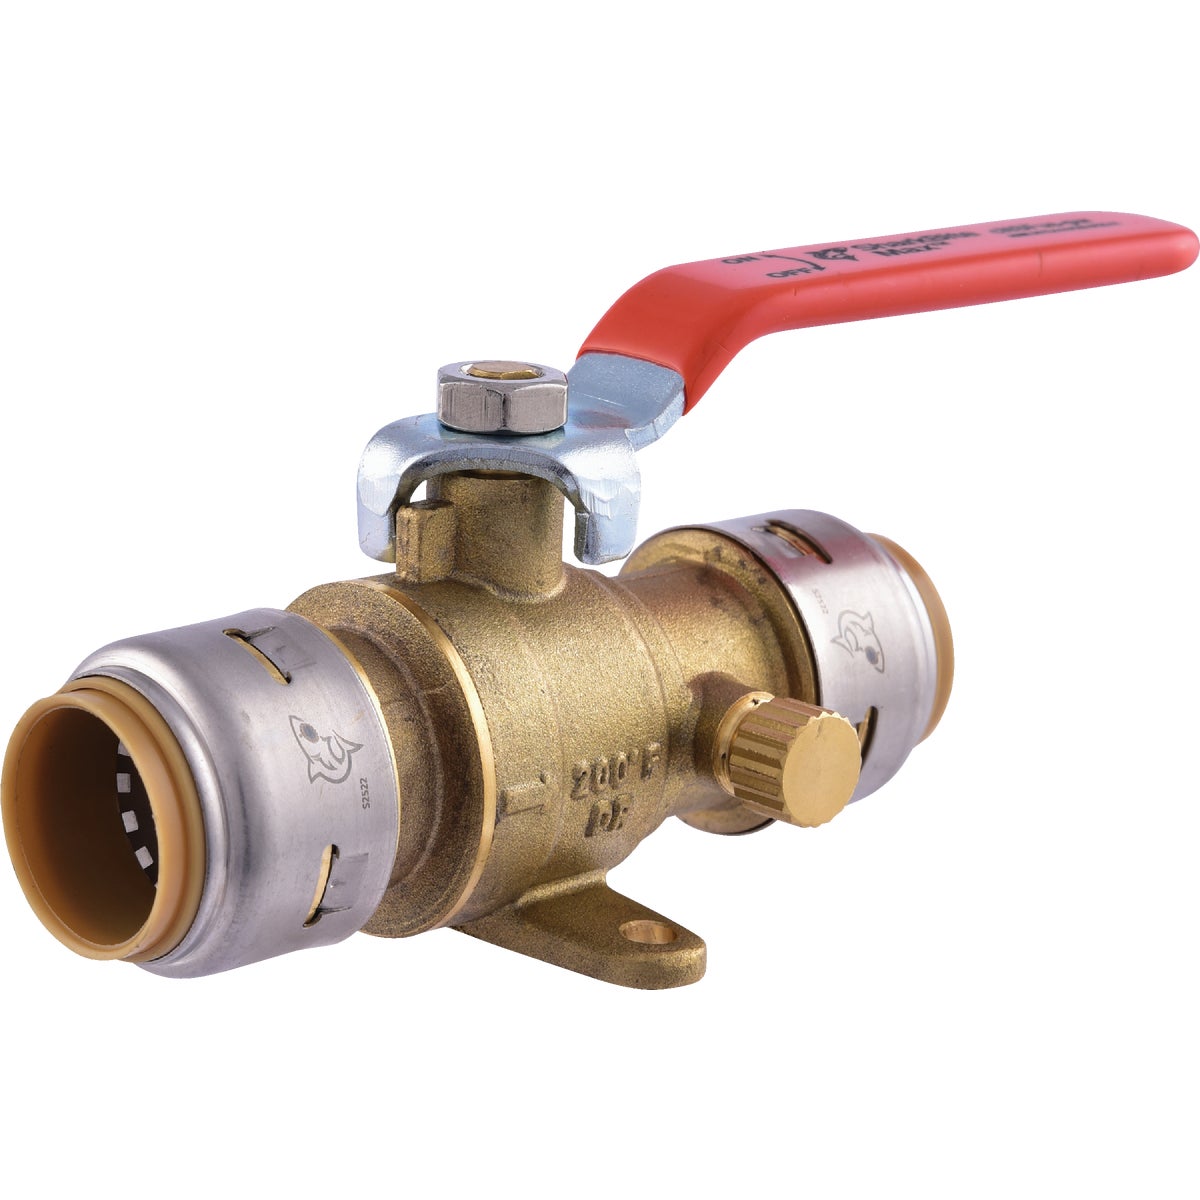 SharkBite 3/4 In. Brass Push-Fit Ball Valve with Drain & Mounting Tab